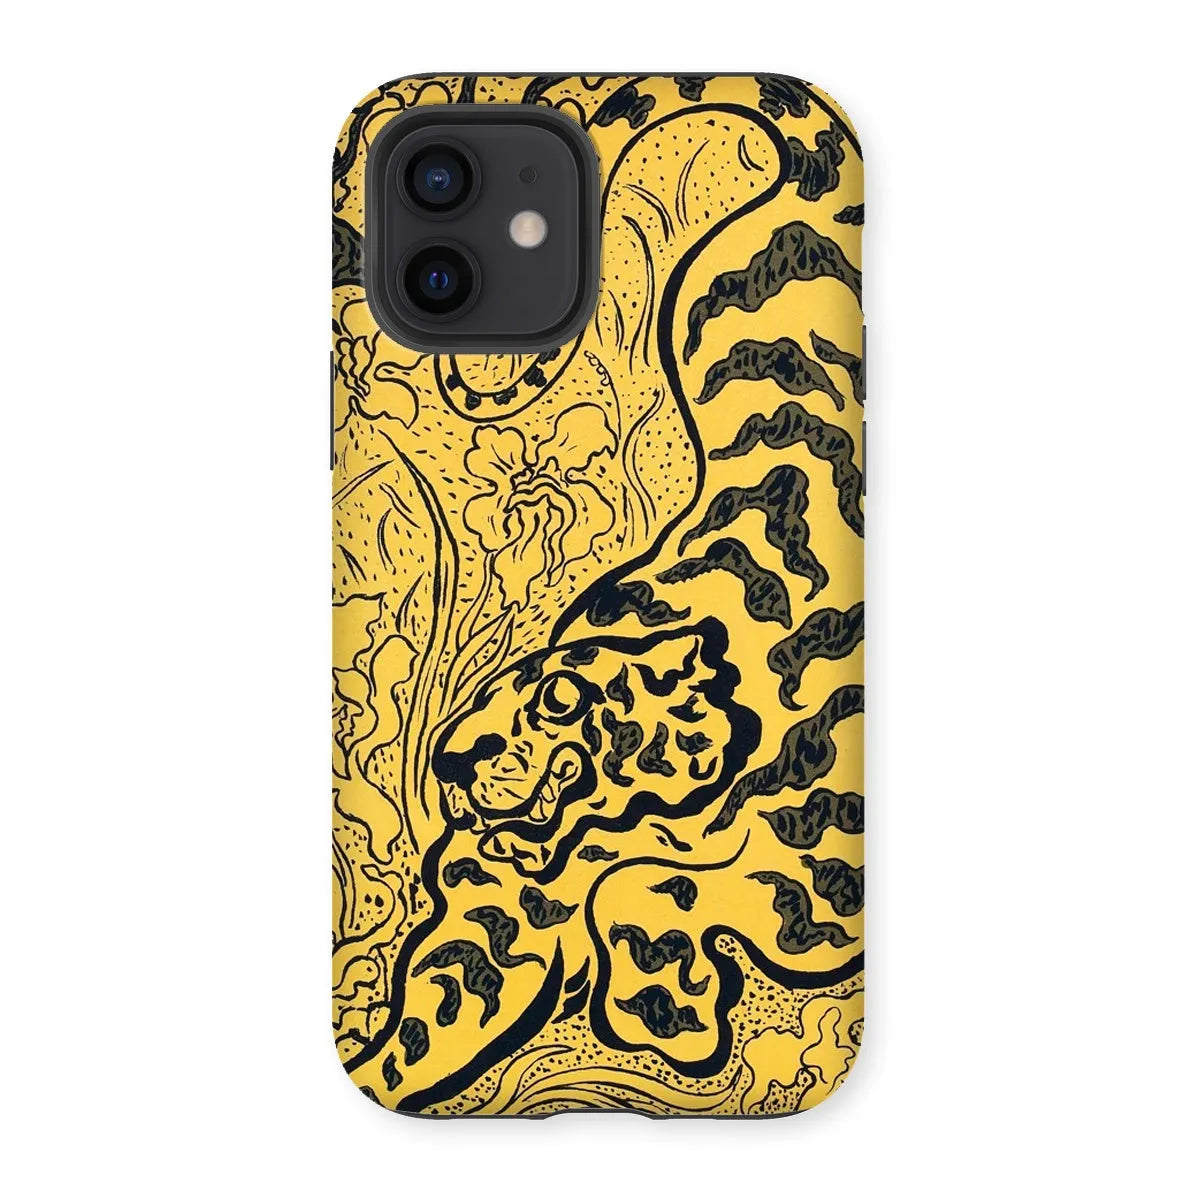 Tiger In The Jungle - Graphic Art Phone Case - Paul Ranson - Iphone 12 / Matte - Mobile Phone Cases - Aesthetic Art